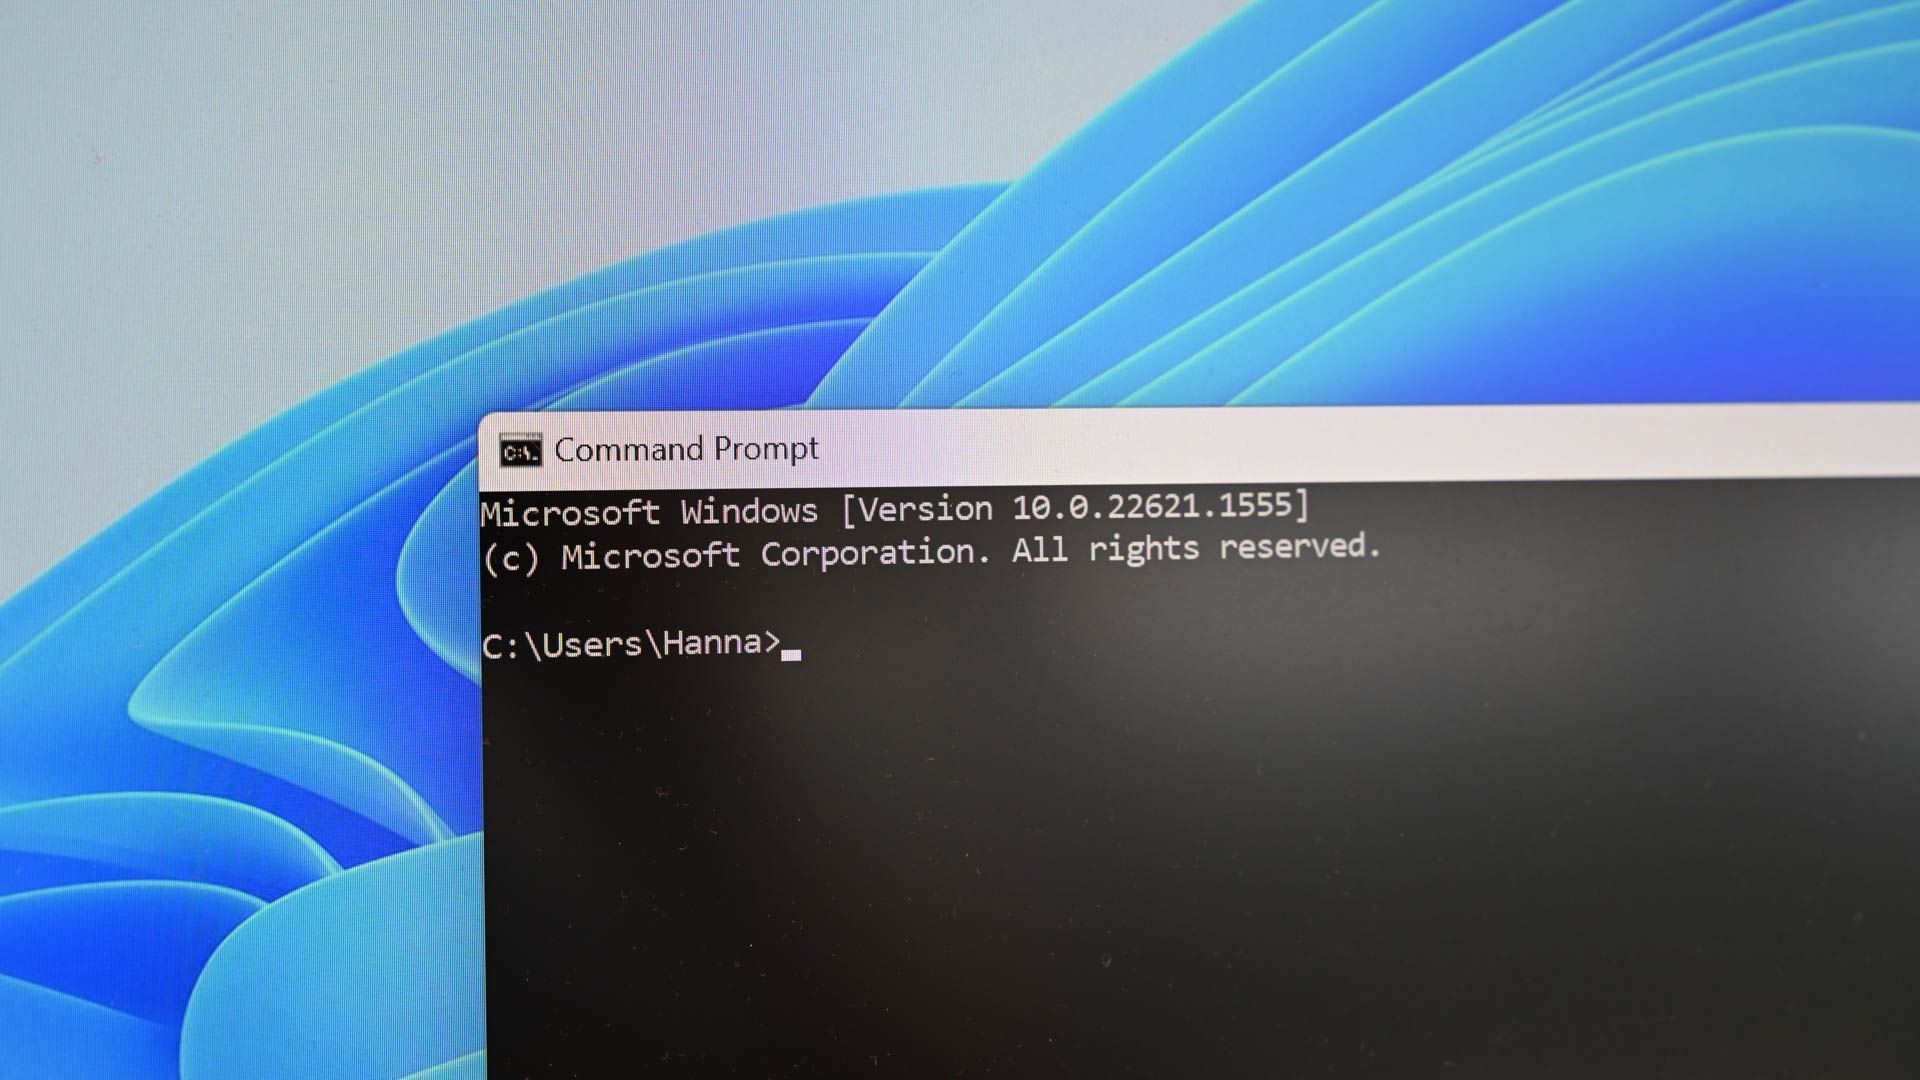 How to Run Program from CMD (Command Prompt) Windows 10 - MiniTool